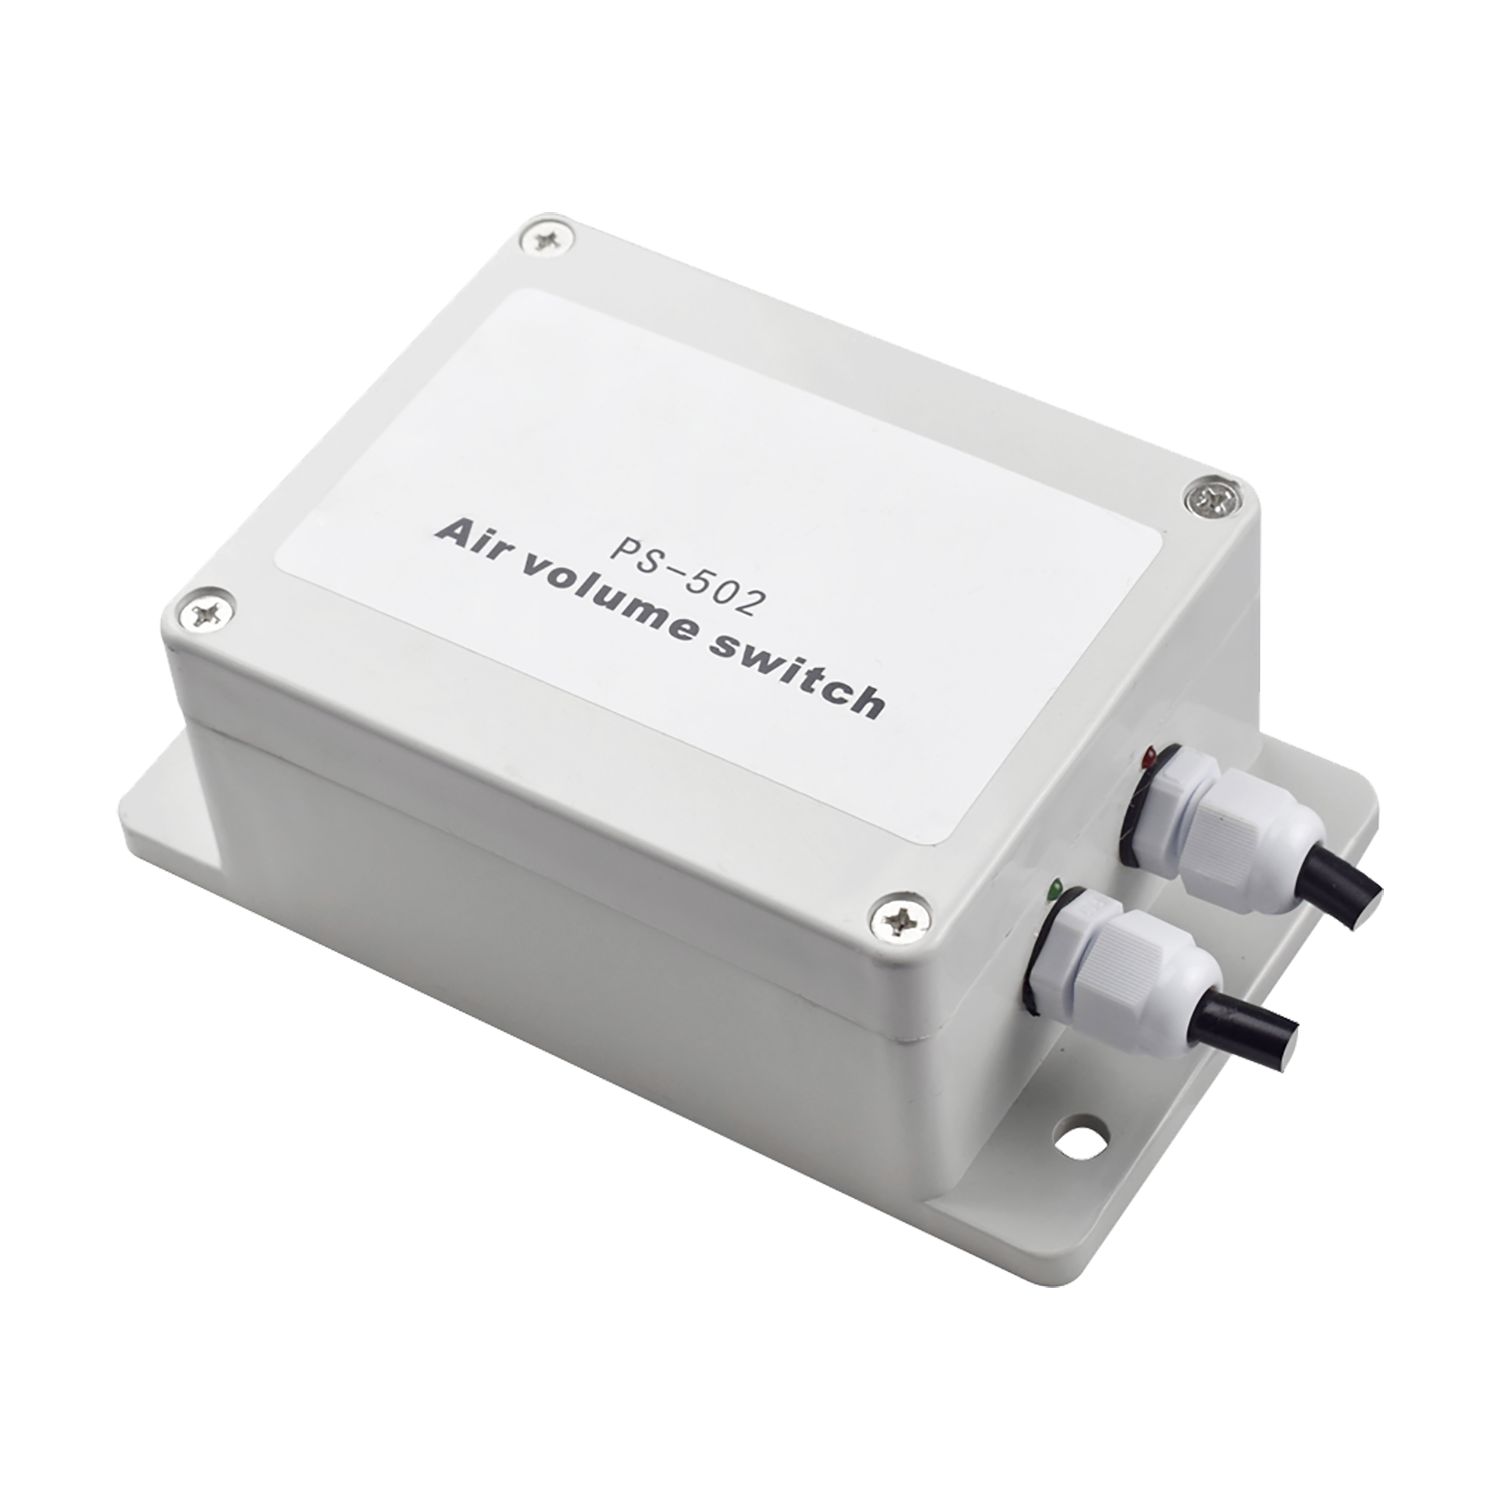 PS-502 Air Pressure Switch For Bipolar Ionization System